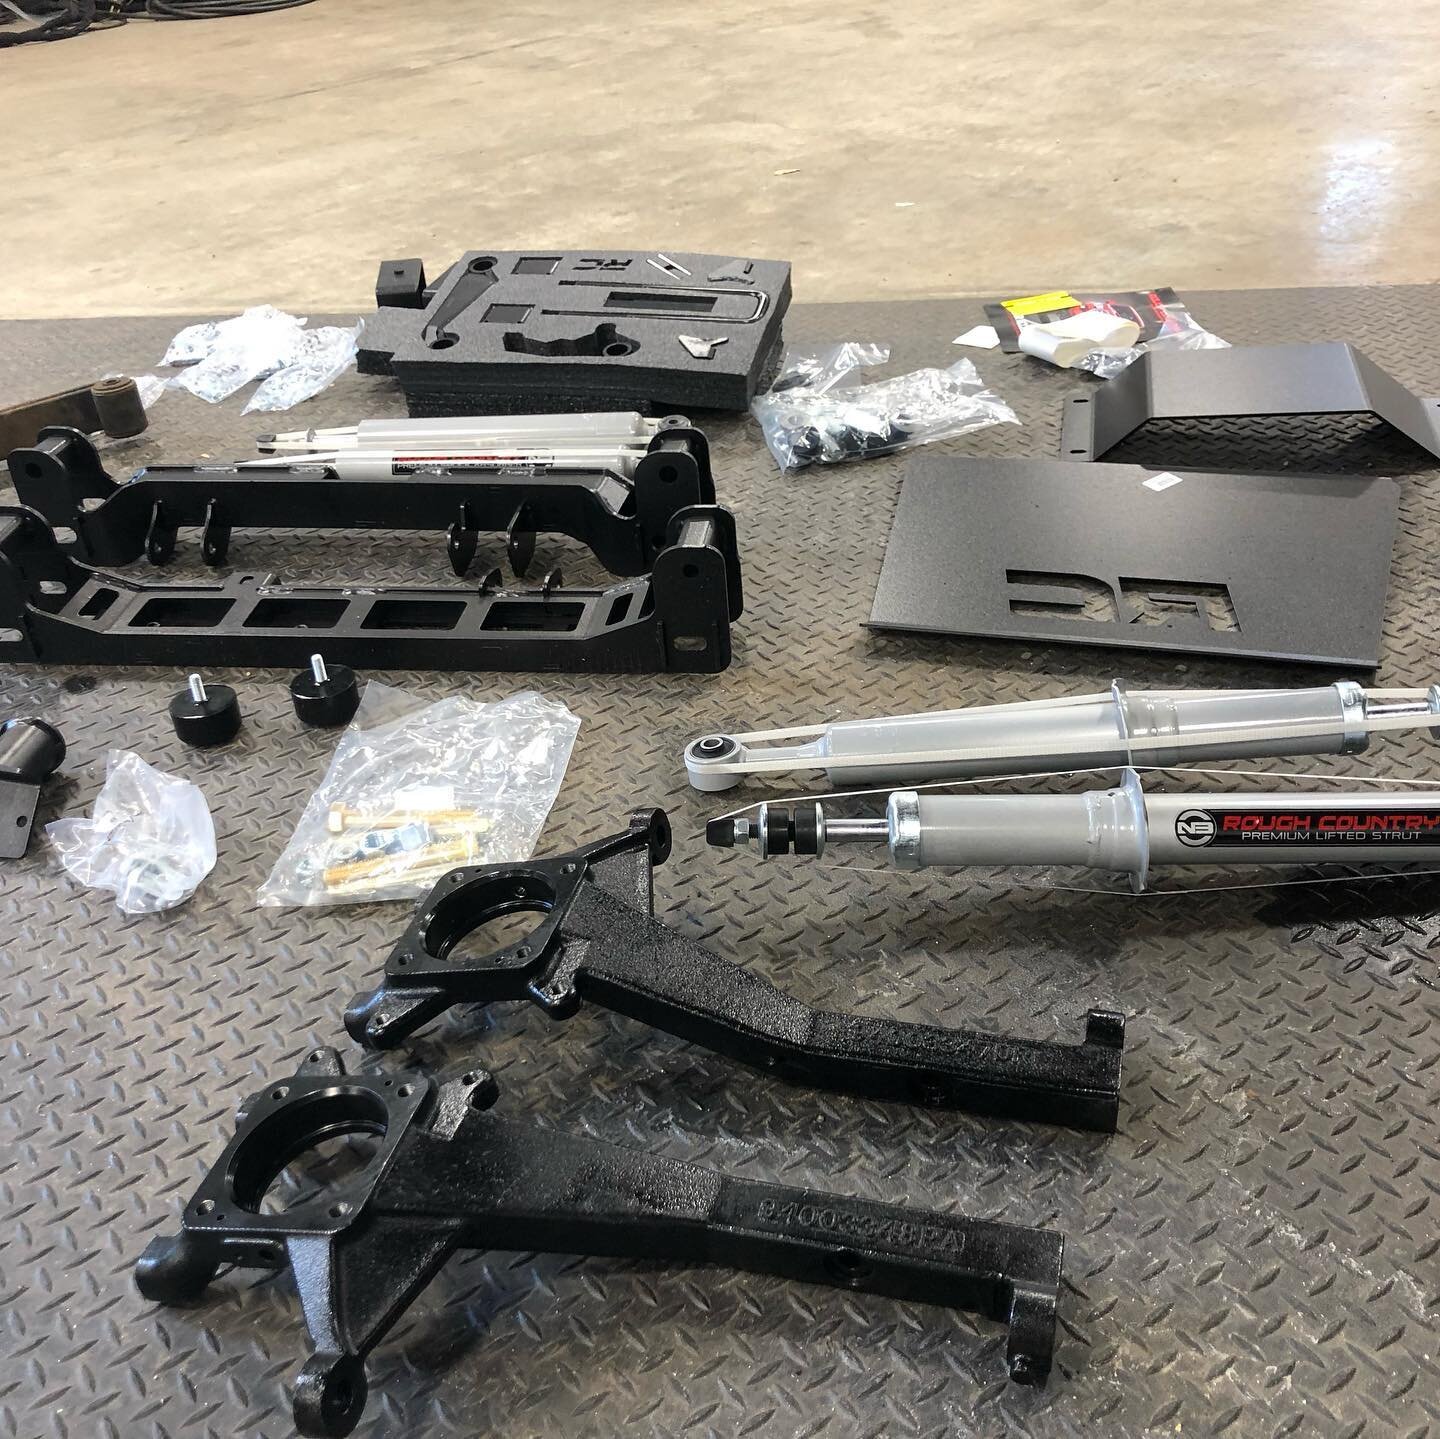 Lifts on lifts on lifts for a variety of vehicles. The requests for lift kits as well as wheels and tires have been rolling in. COVID has not slowed down the work flow at all here @synergyautolab #toyota #toyotatundra #toyotatacoma #jeep #wrangler @r